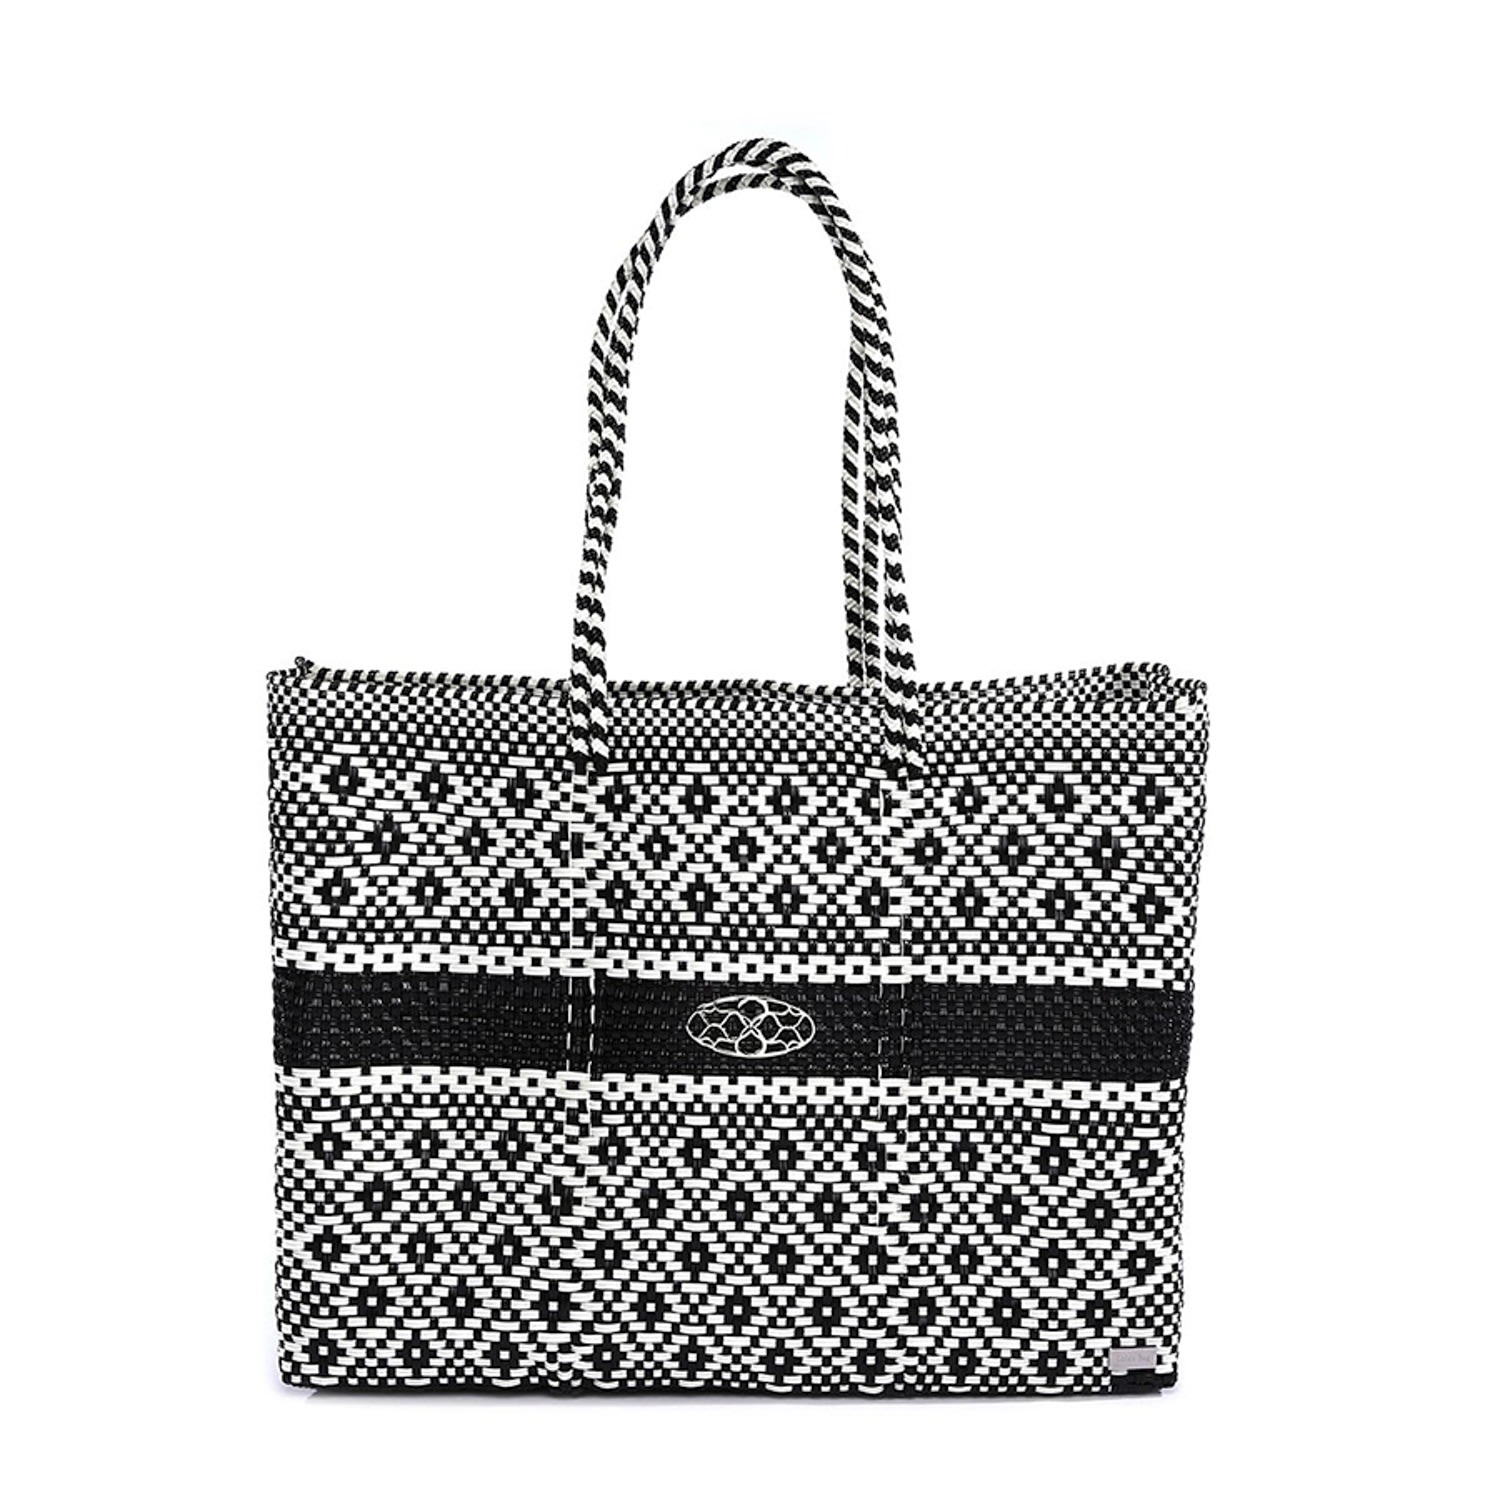 Lolas Bag Women's Black White Travel Tote Bag With Clutch In Gray